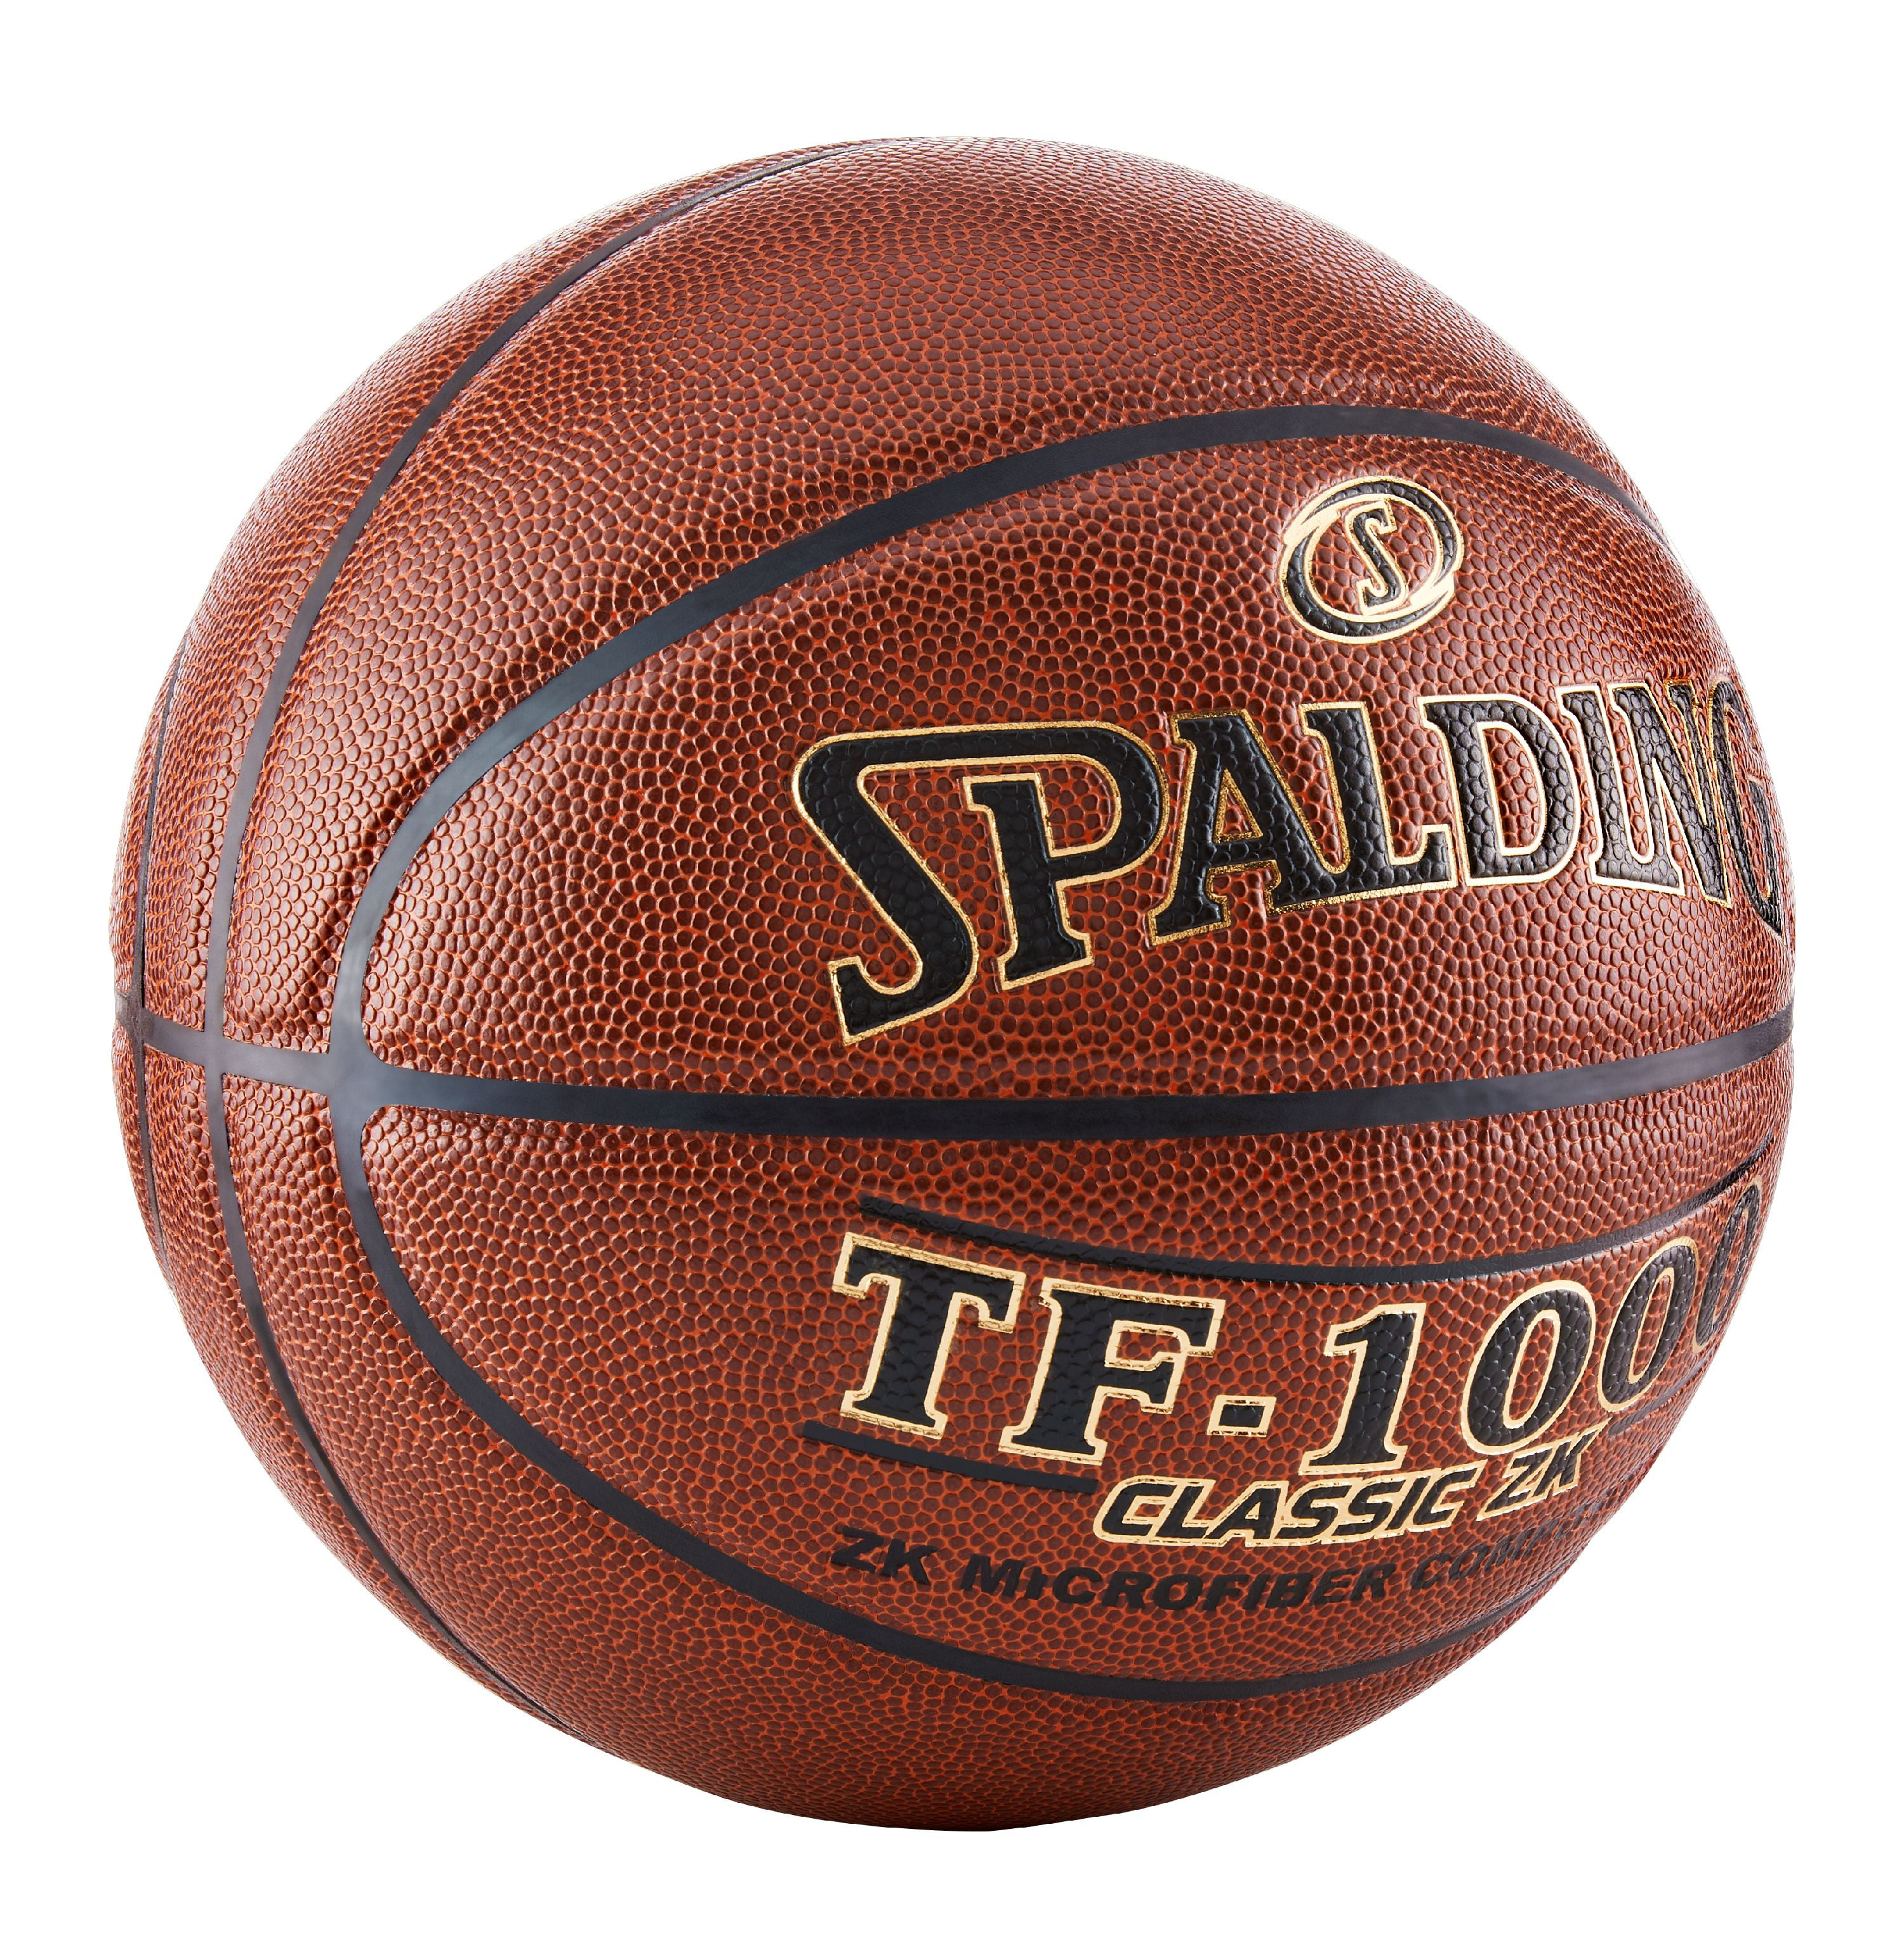 NEW Spalding TF1000 Classic Composite Leather Basketball 29.5" 